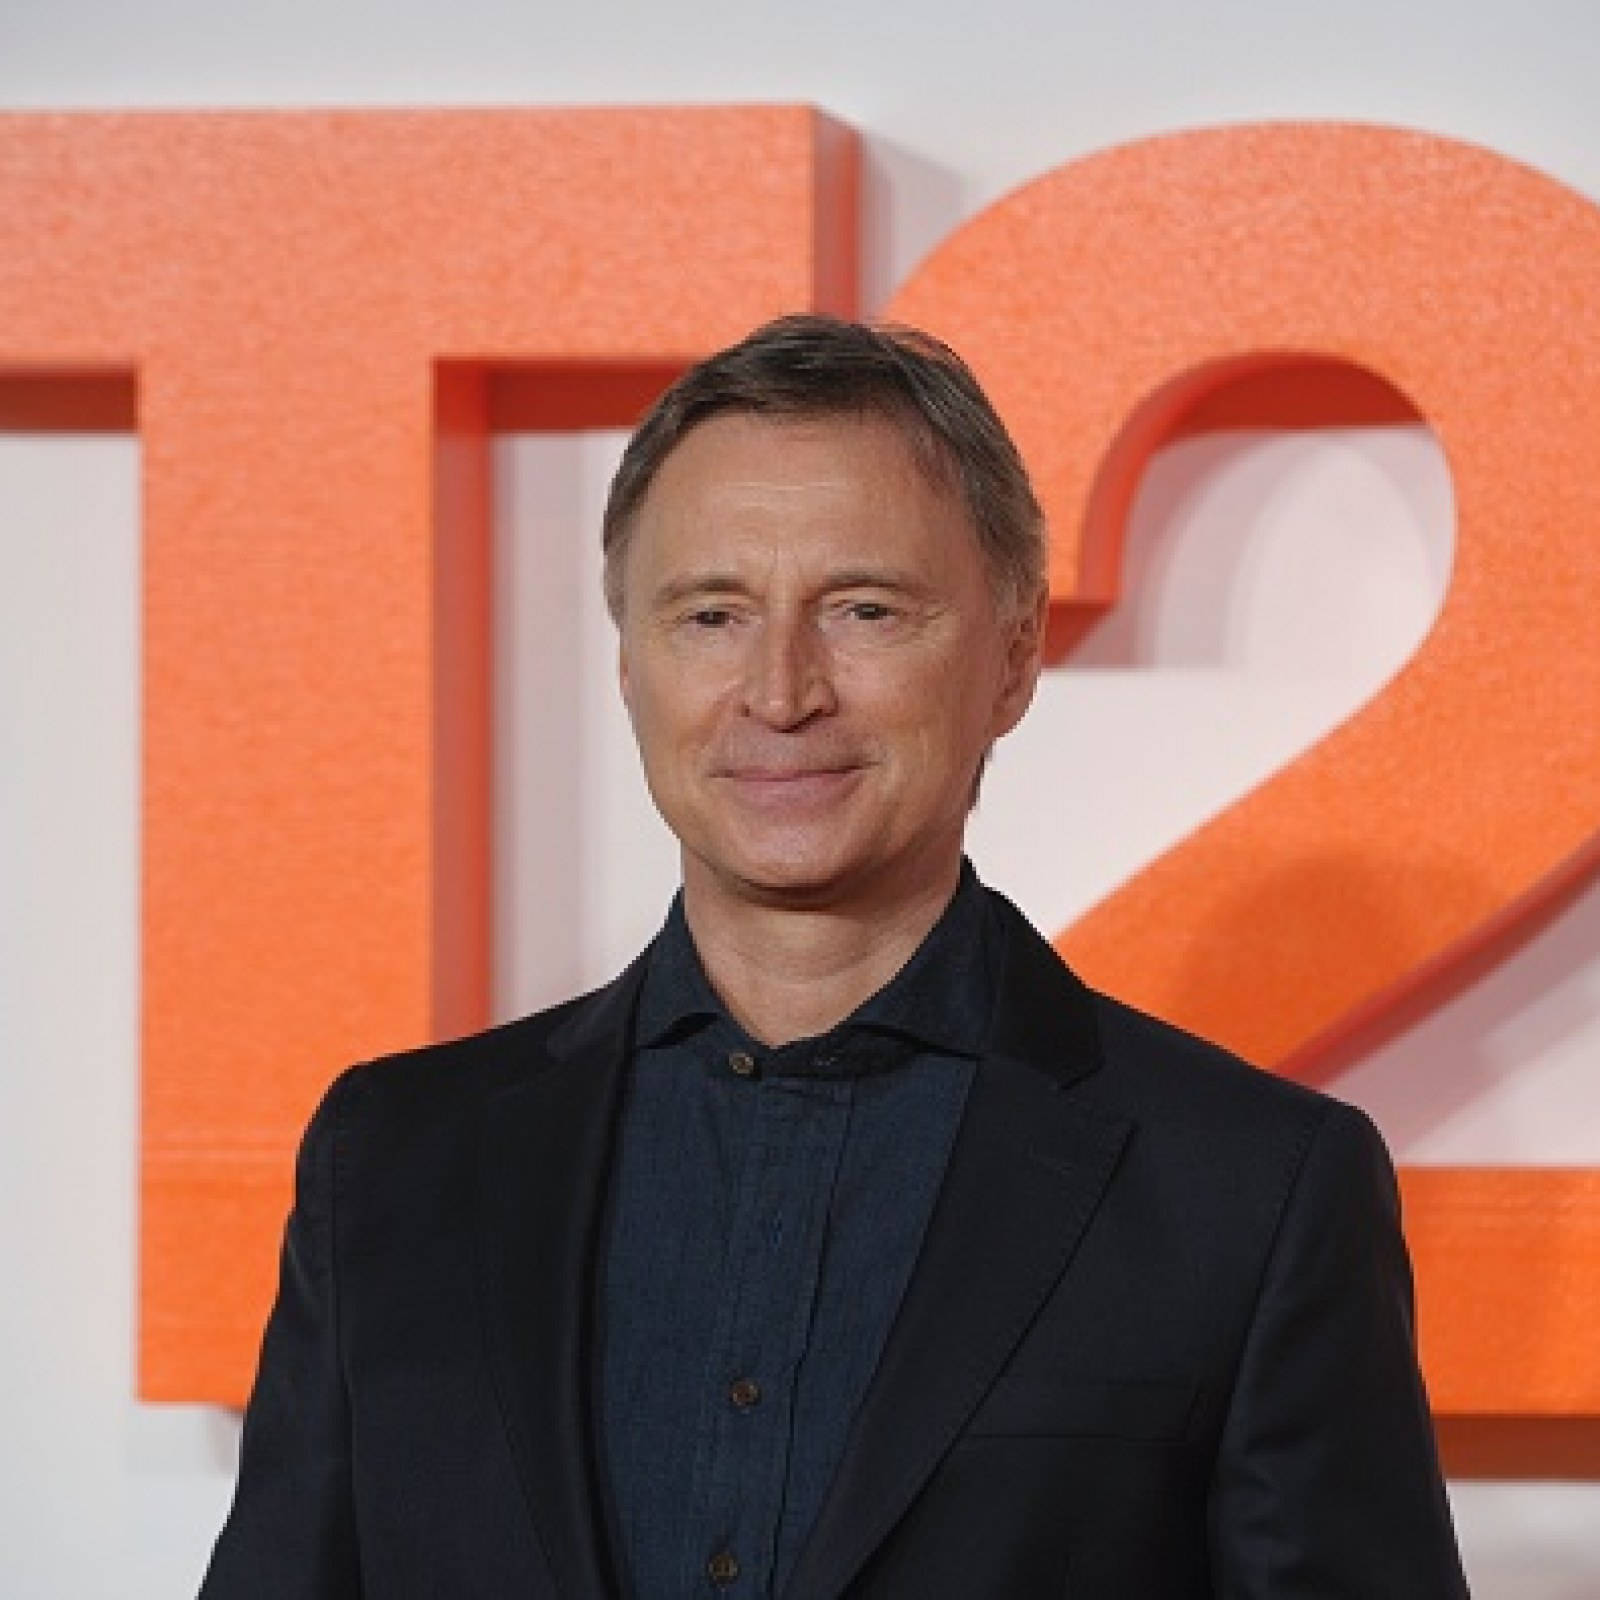 Renowned Actor Robert Carlyle in T2 Trainspotting Wallpaper